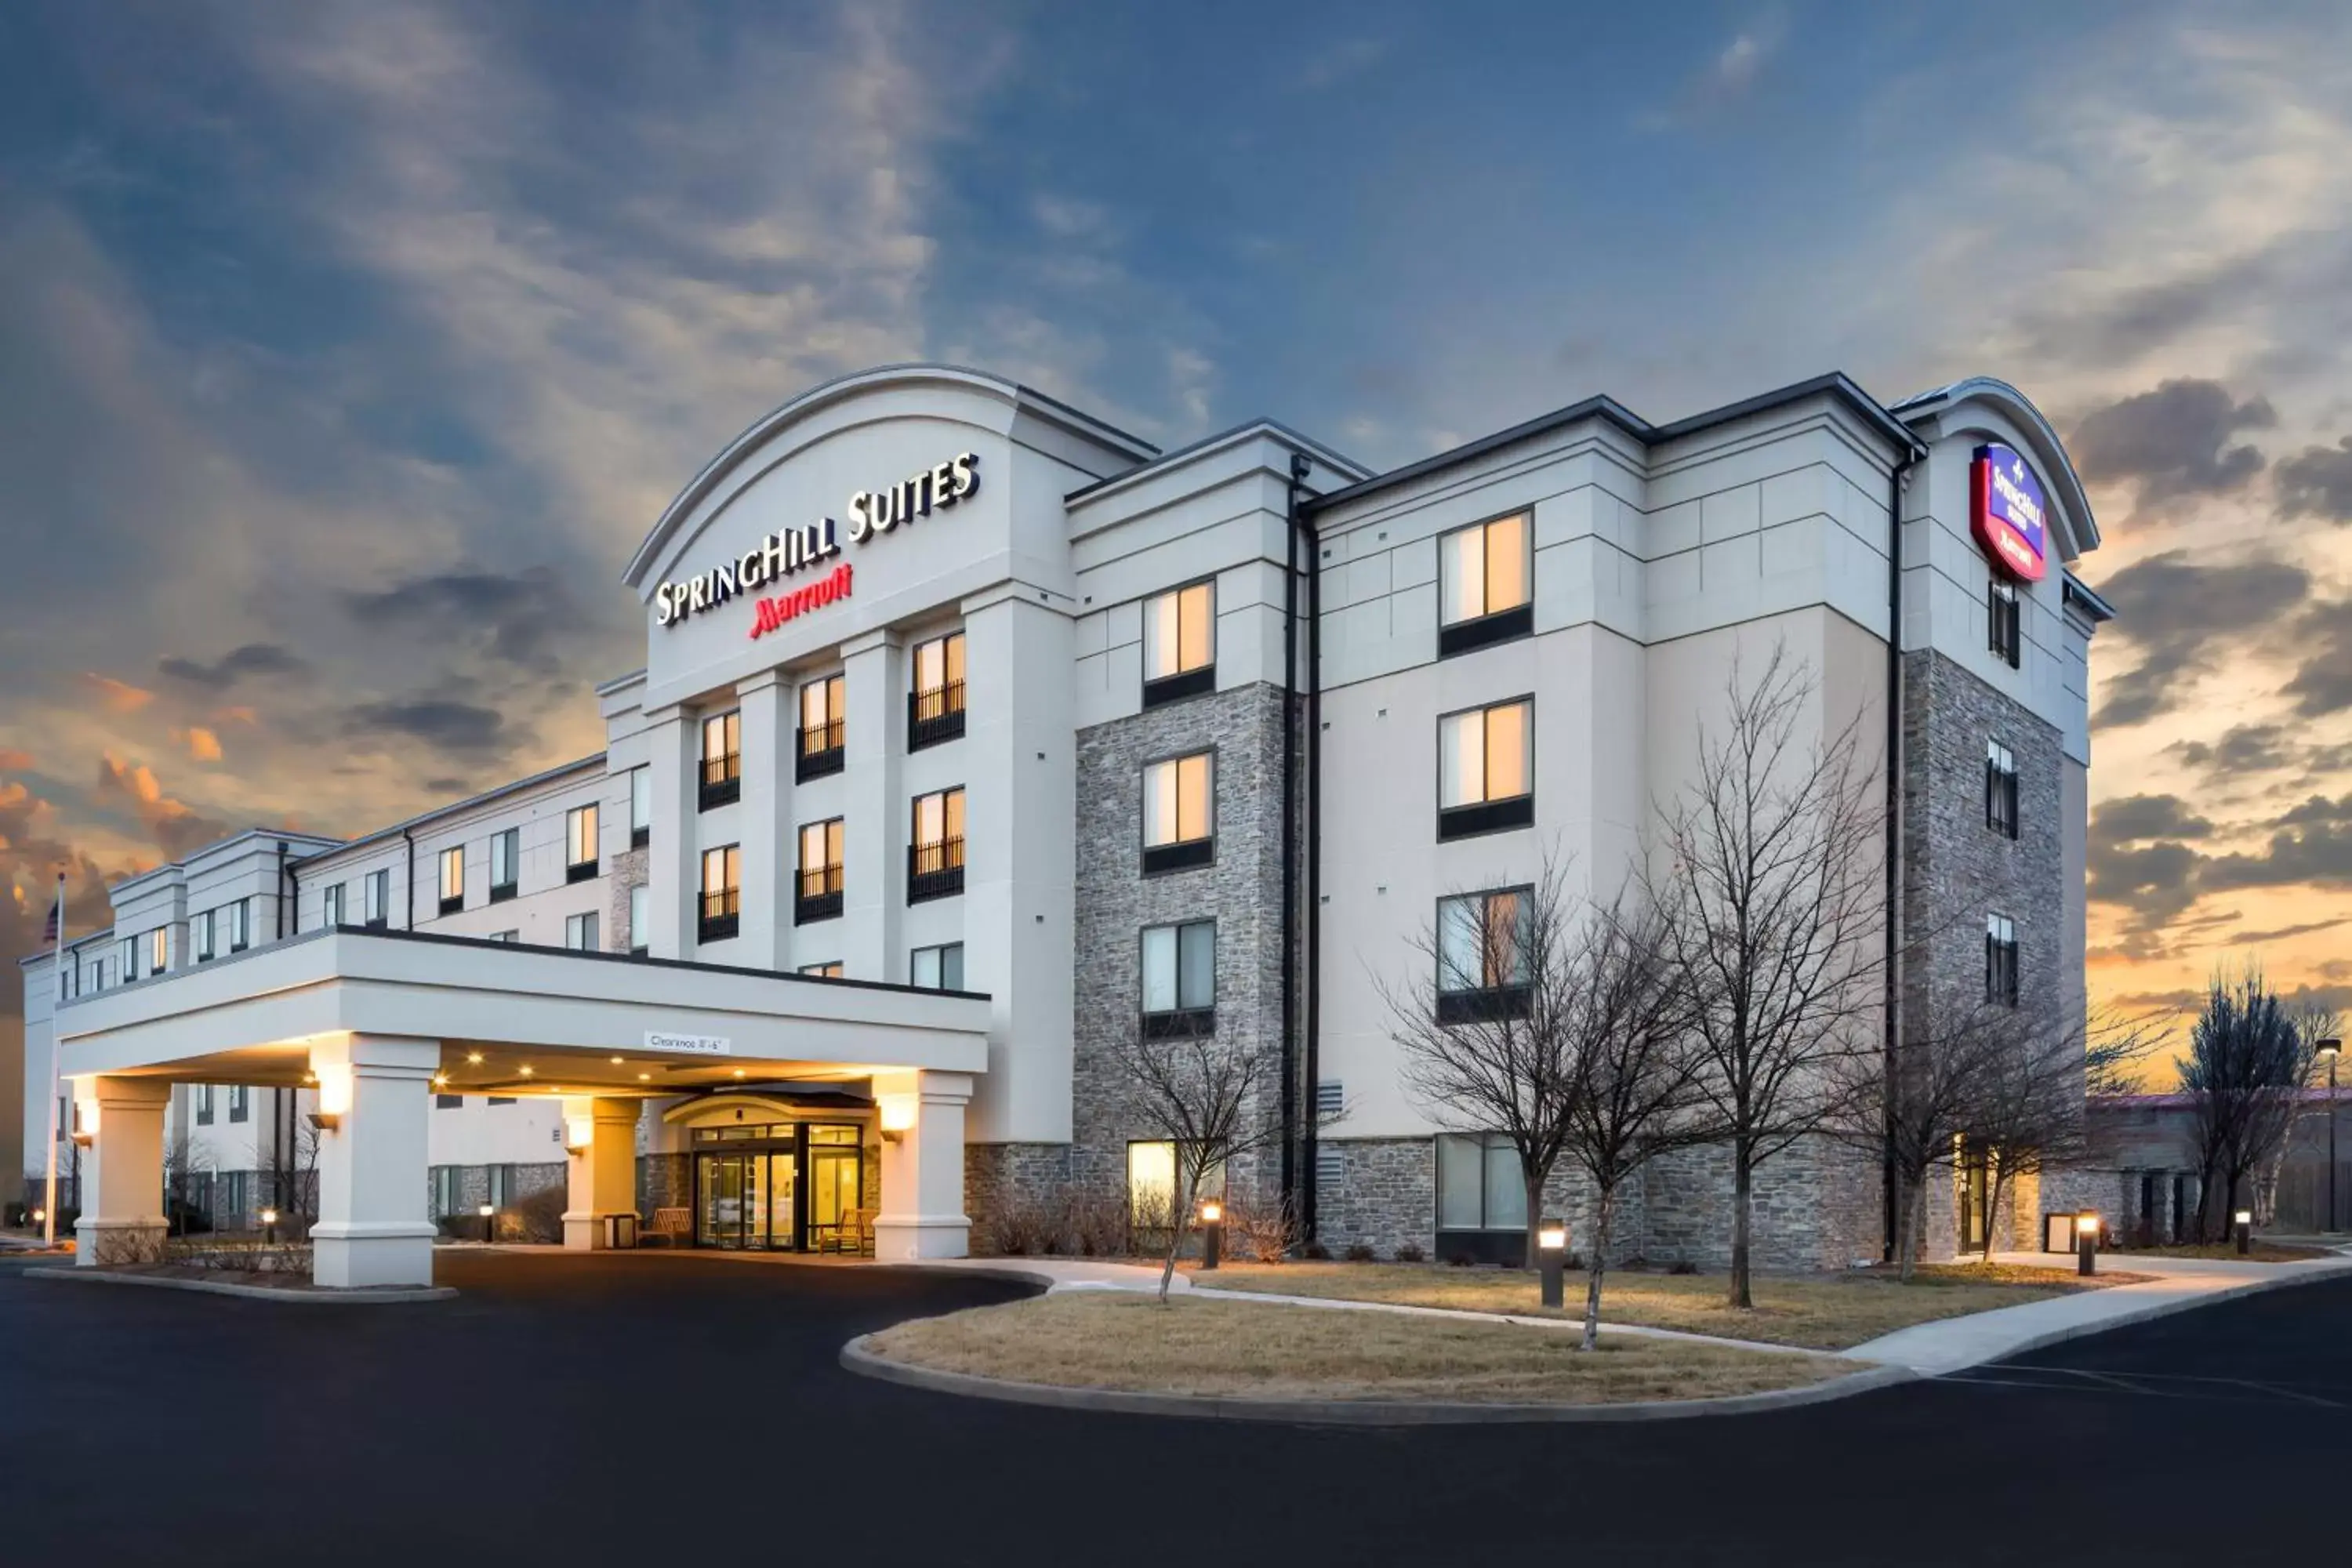 Property Building in SpringHill Suites Indianapolis Fishers